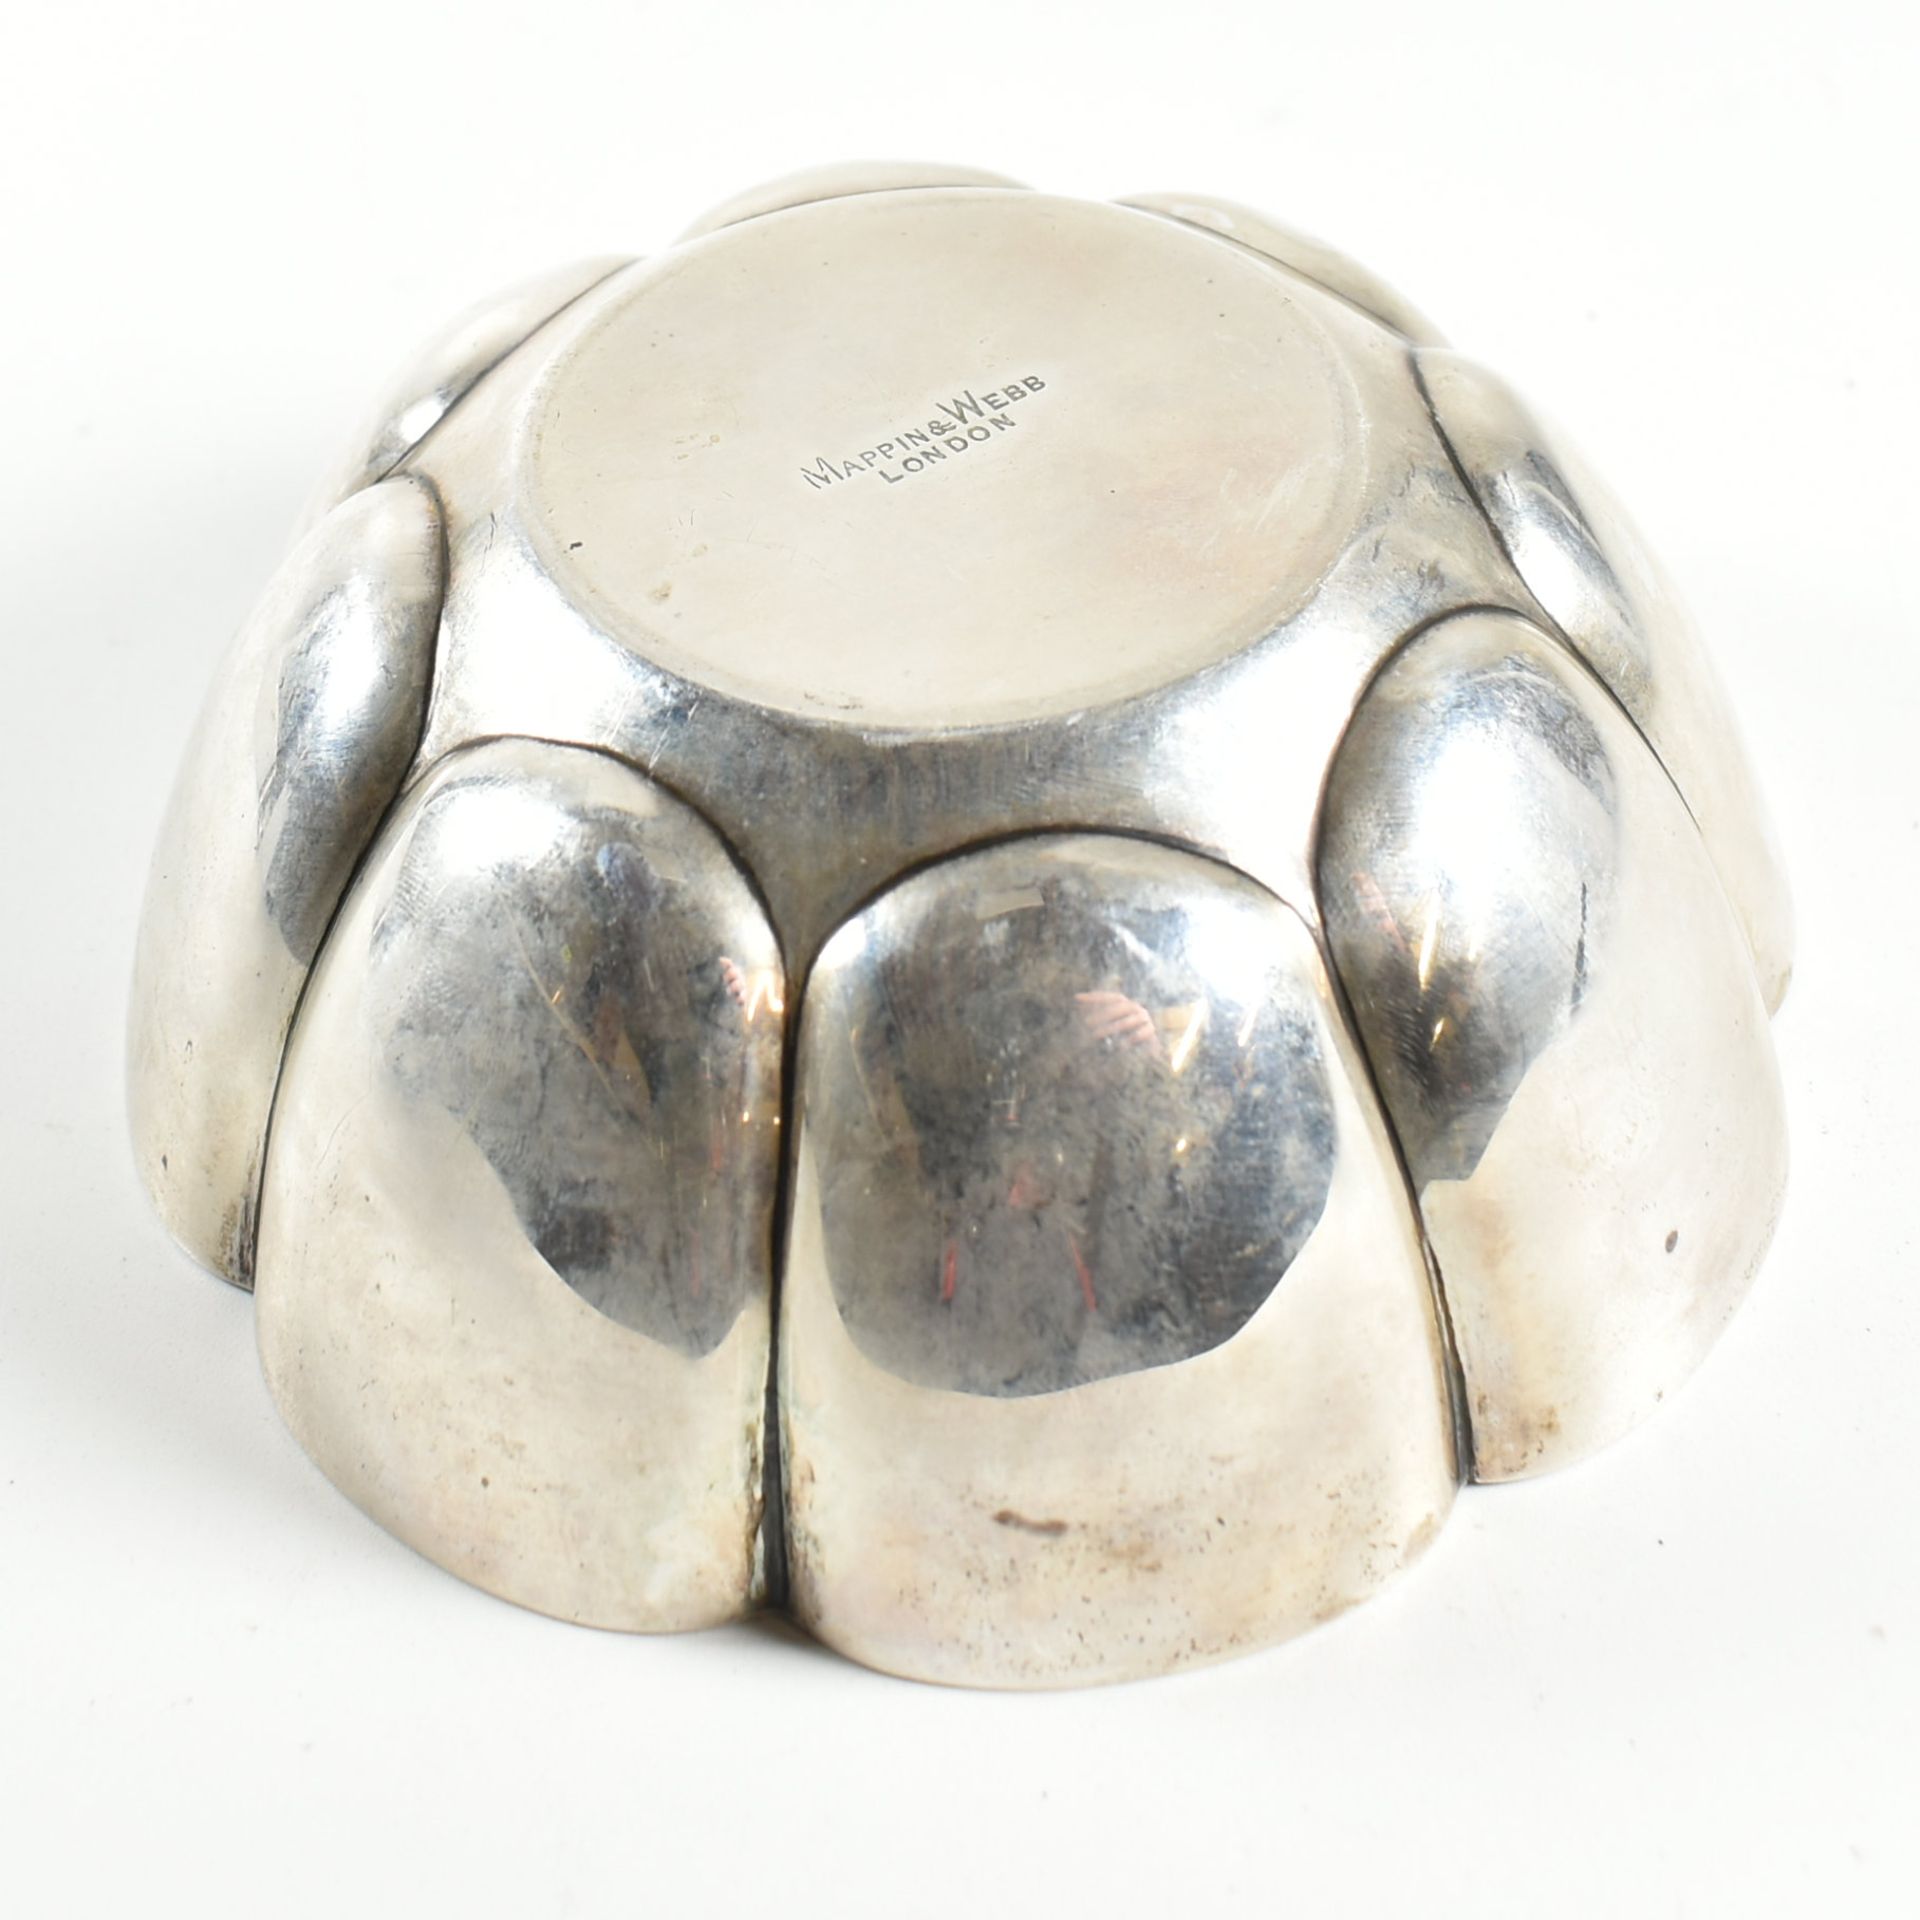 EDWARD VII HALLMARKED SILVER BOWL & OTHER NAPKIN RINGS - Image 6 of 6